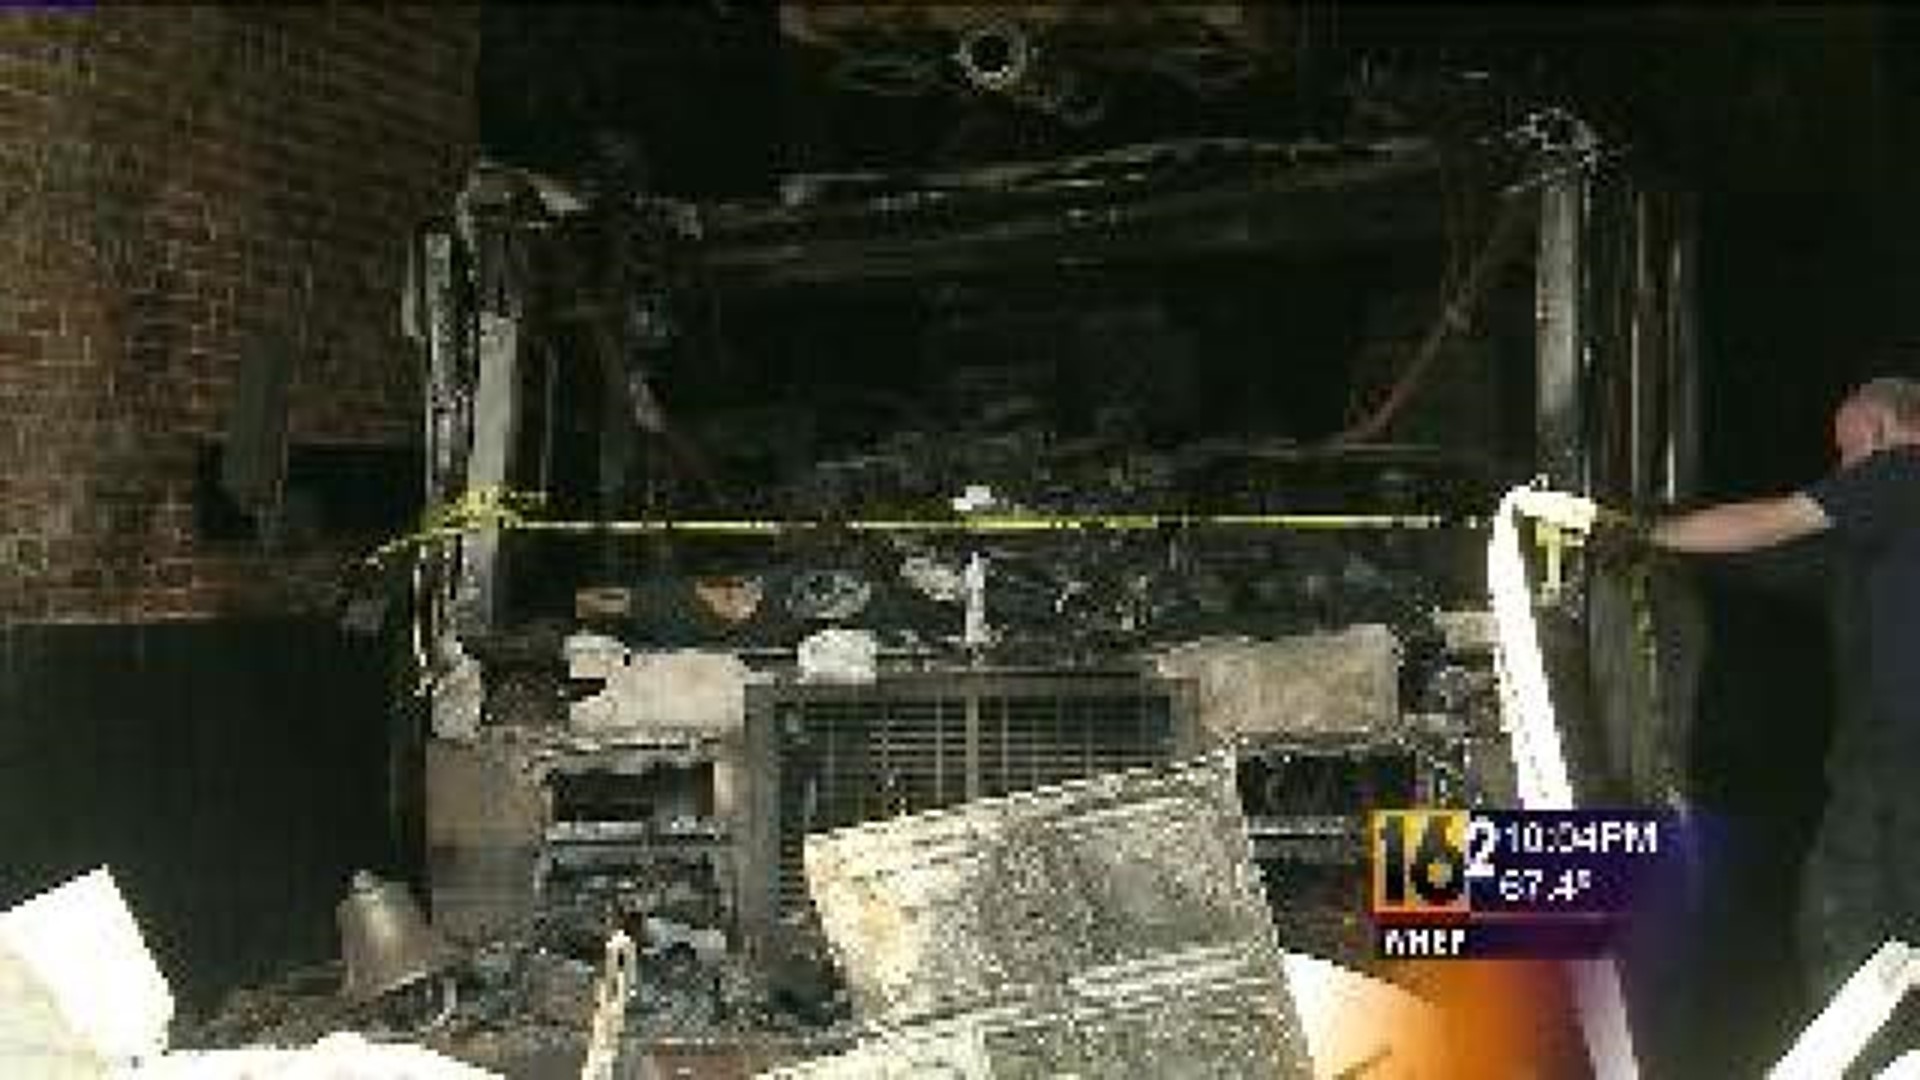 Fire Company Loses Equipment, Fire Truck after Devastating Fire